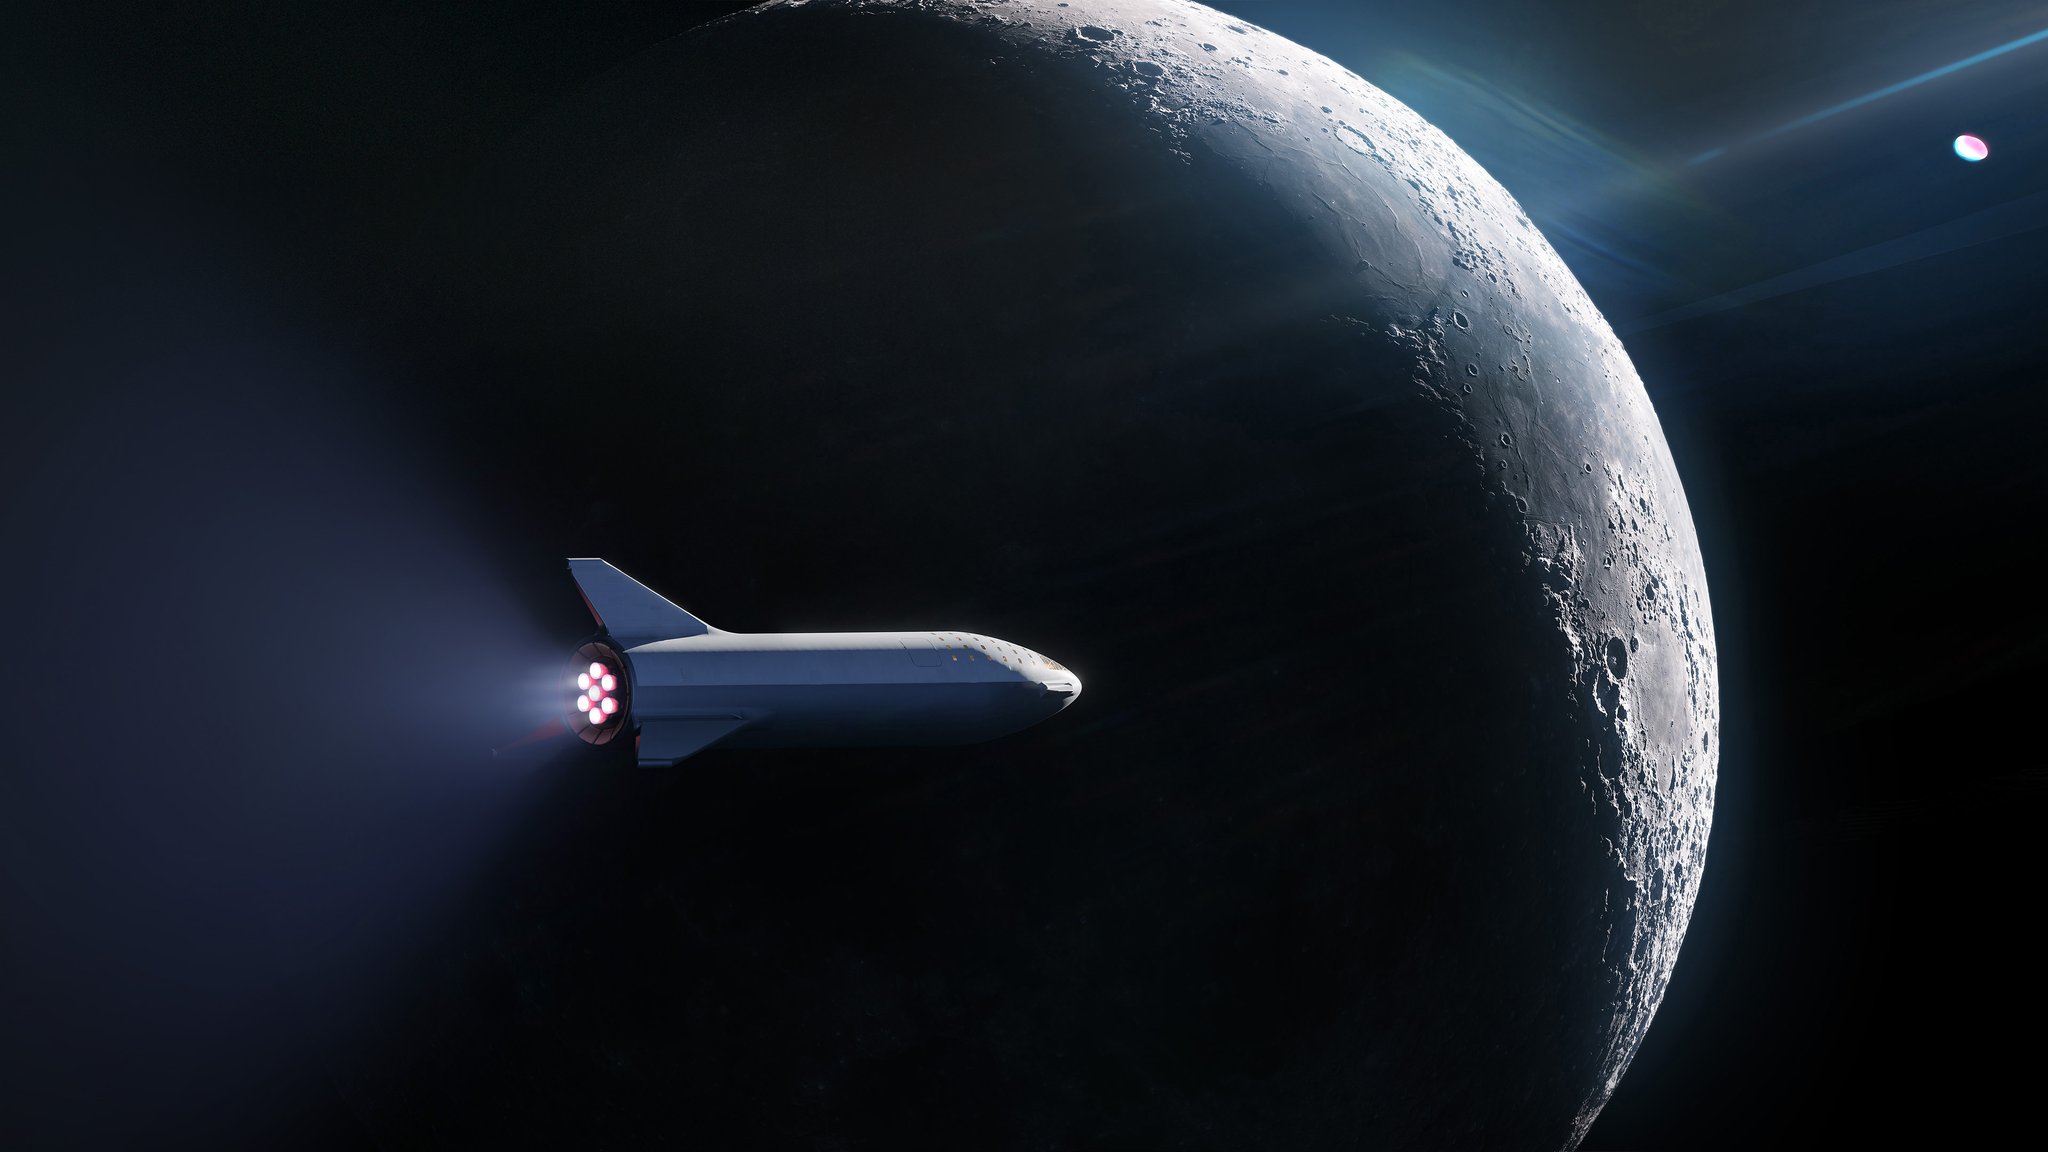 SpaceX will be launching people around the moon in 2023. Image: SpaceX